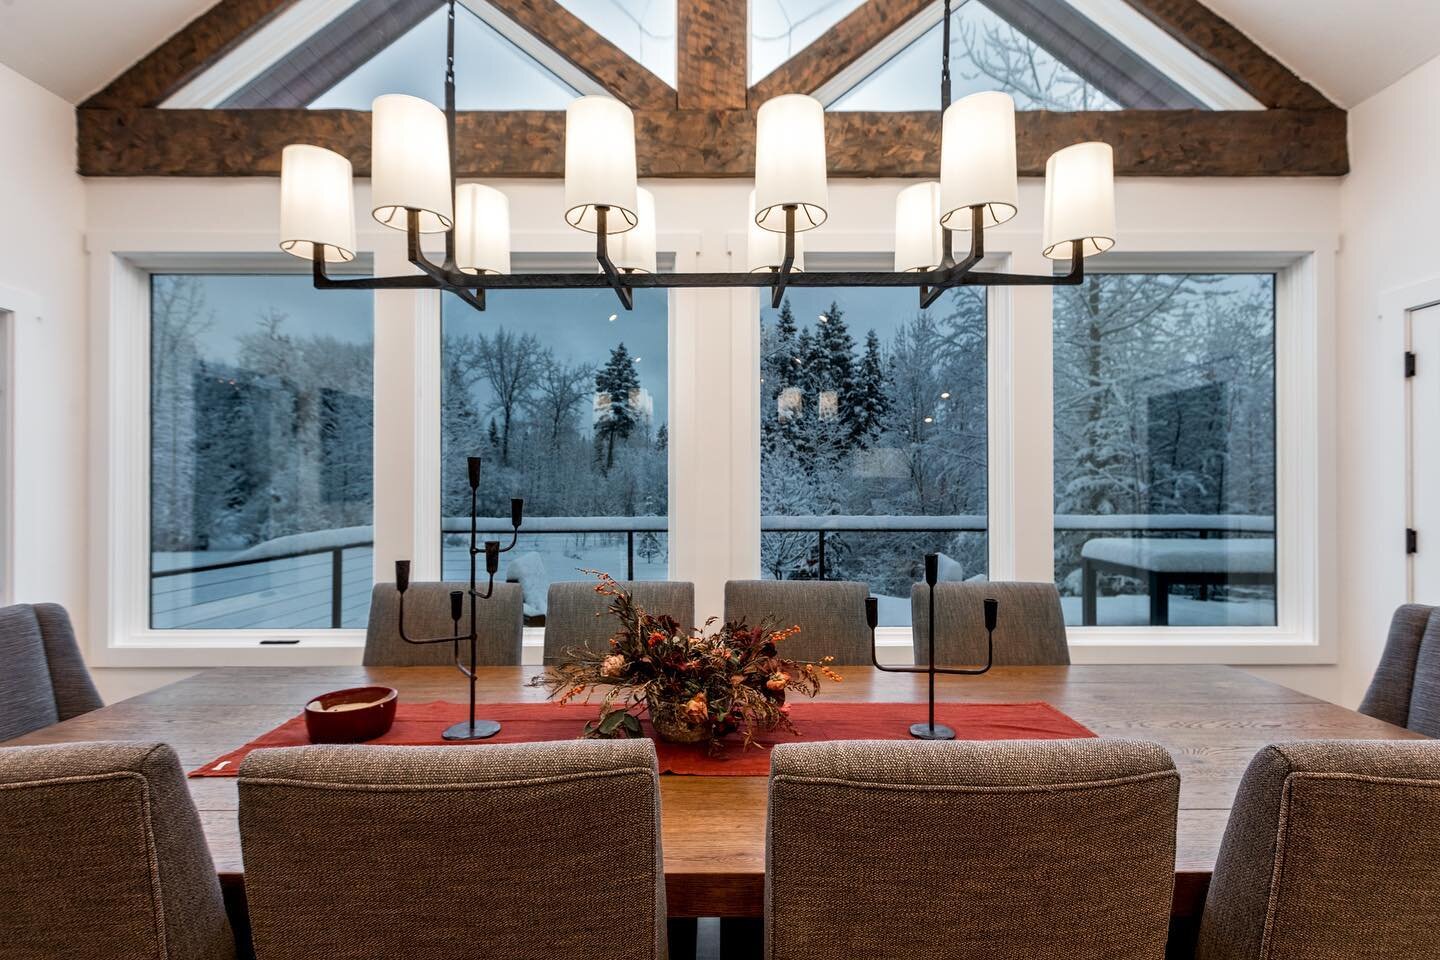 Enjoying the holiday season with a beautiful view of the snow outside from this aged oak dining table. #holidayseason #snowyview #diningroom #cozyvibes